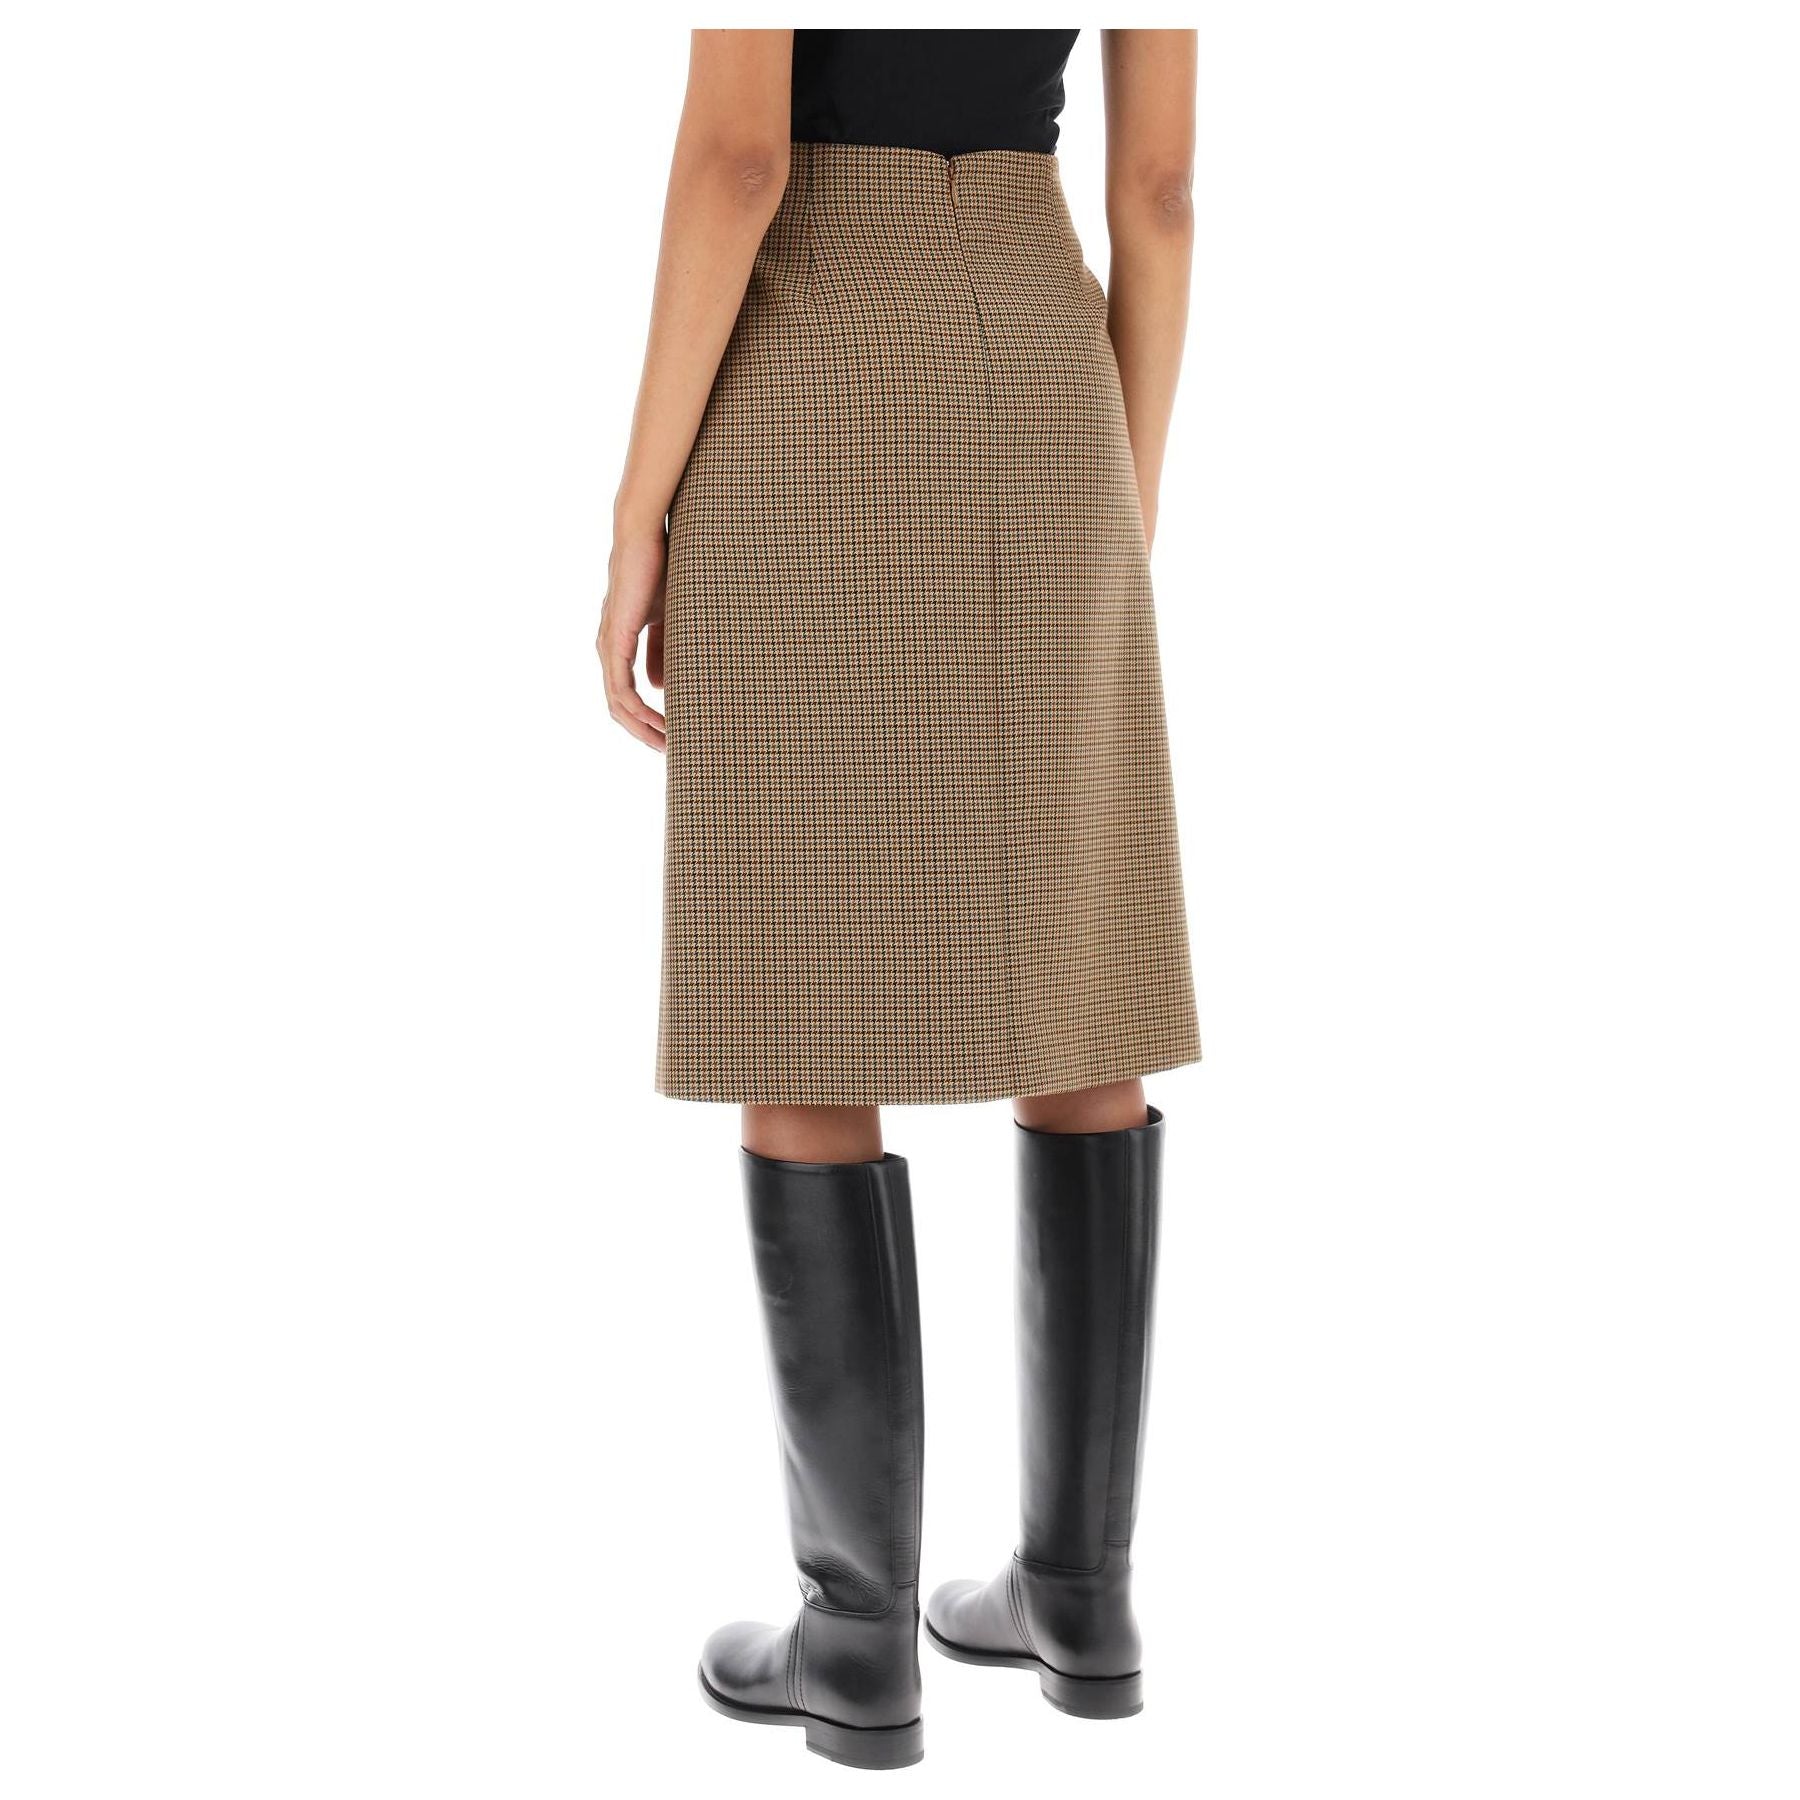 Houndstooth A Line Skirt With Emblem Buckle